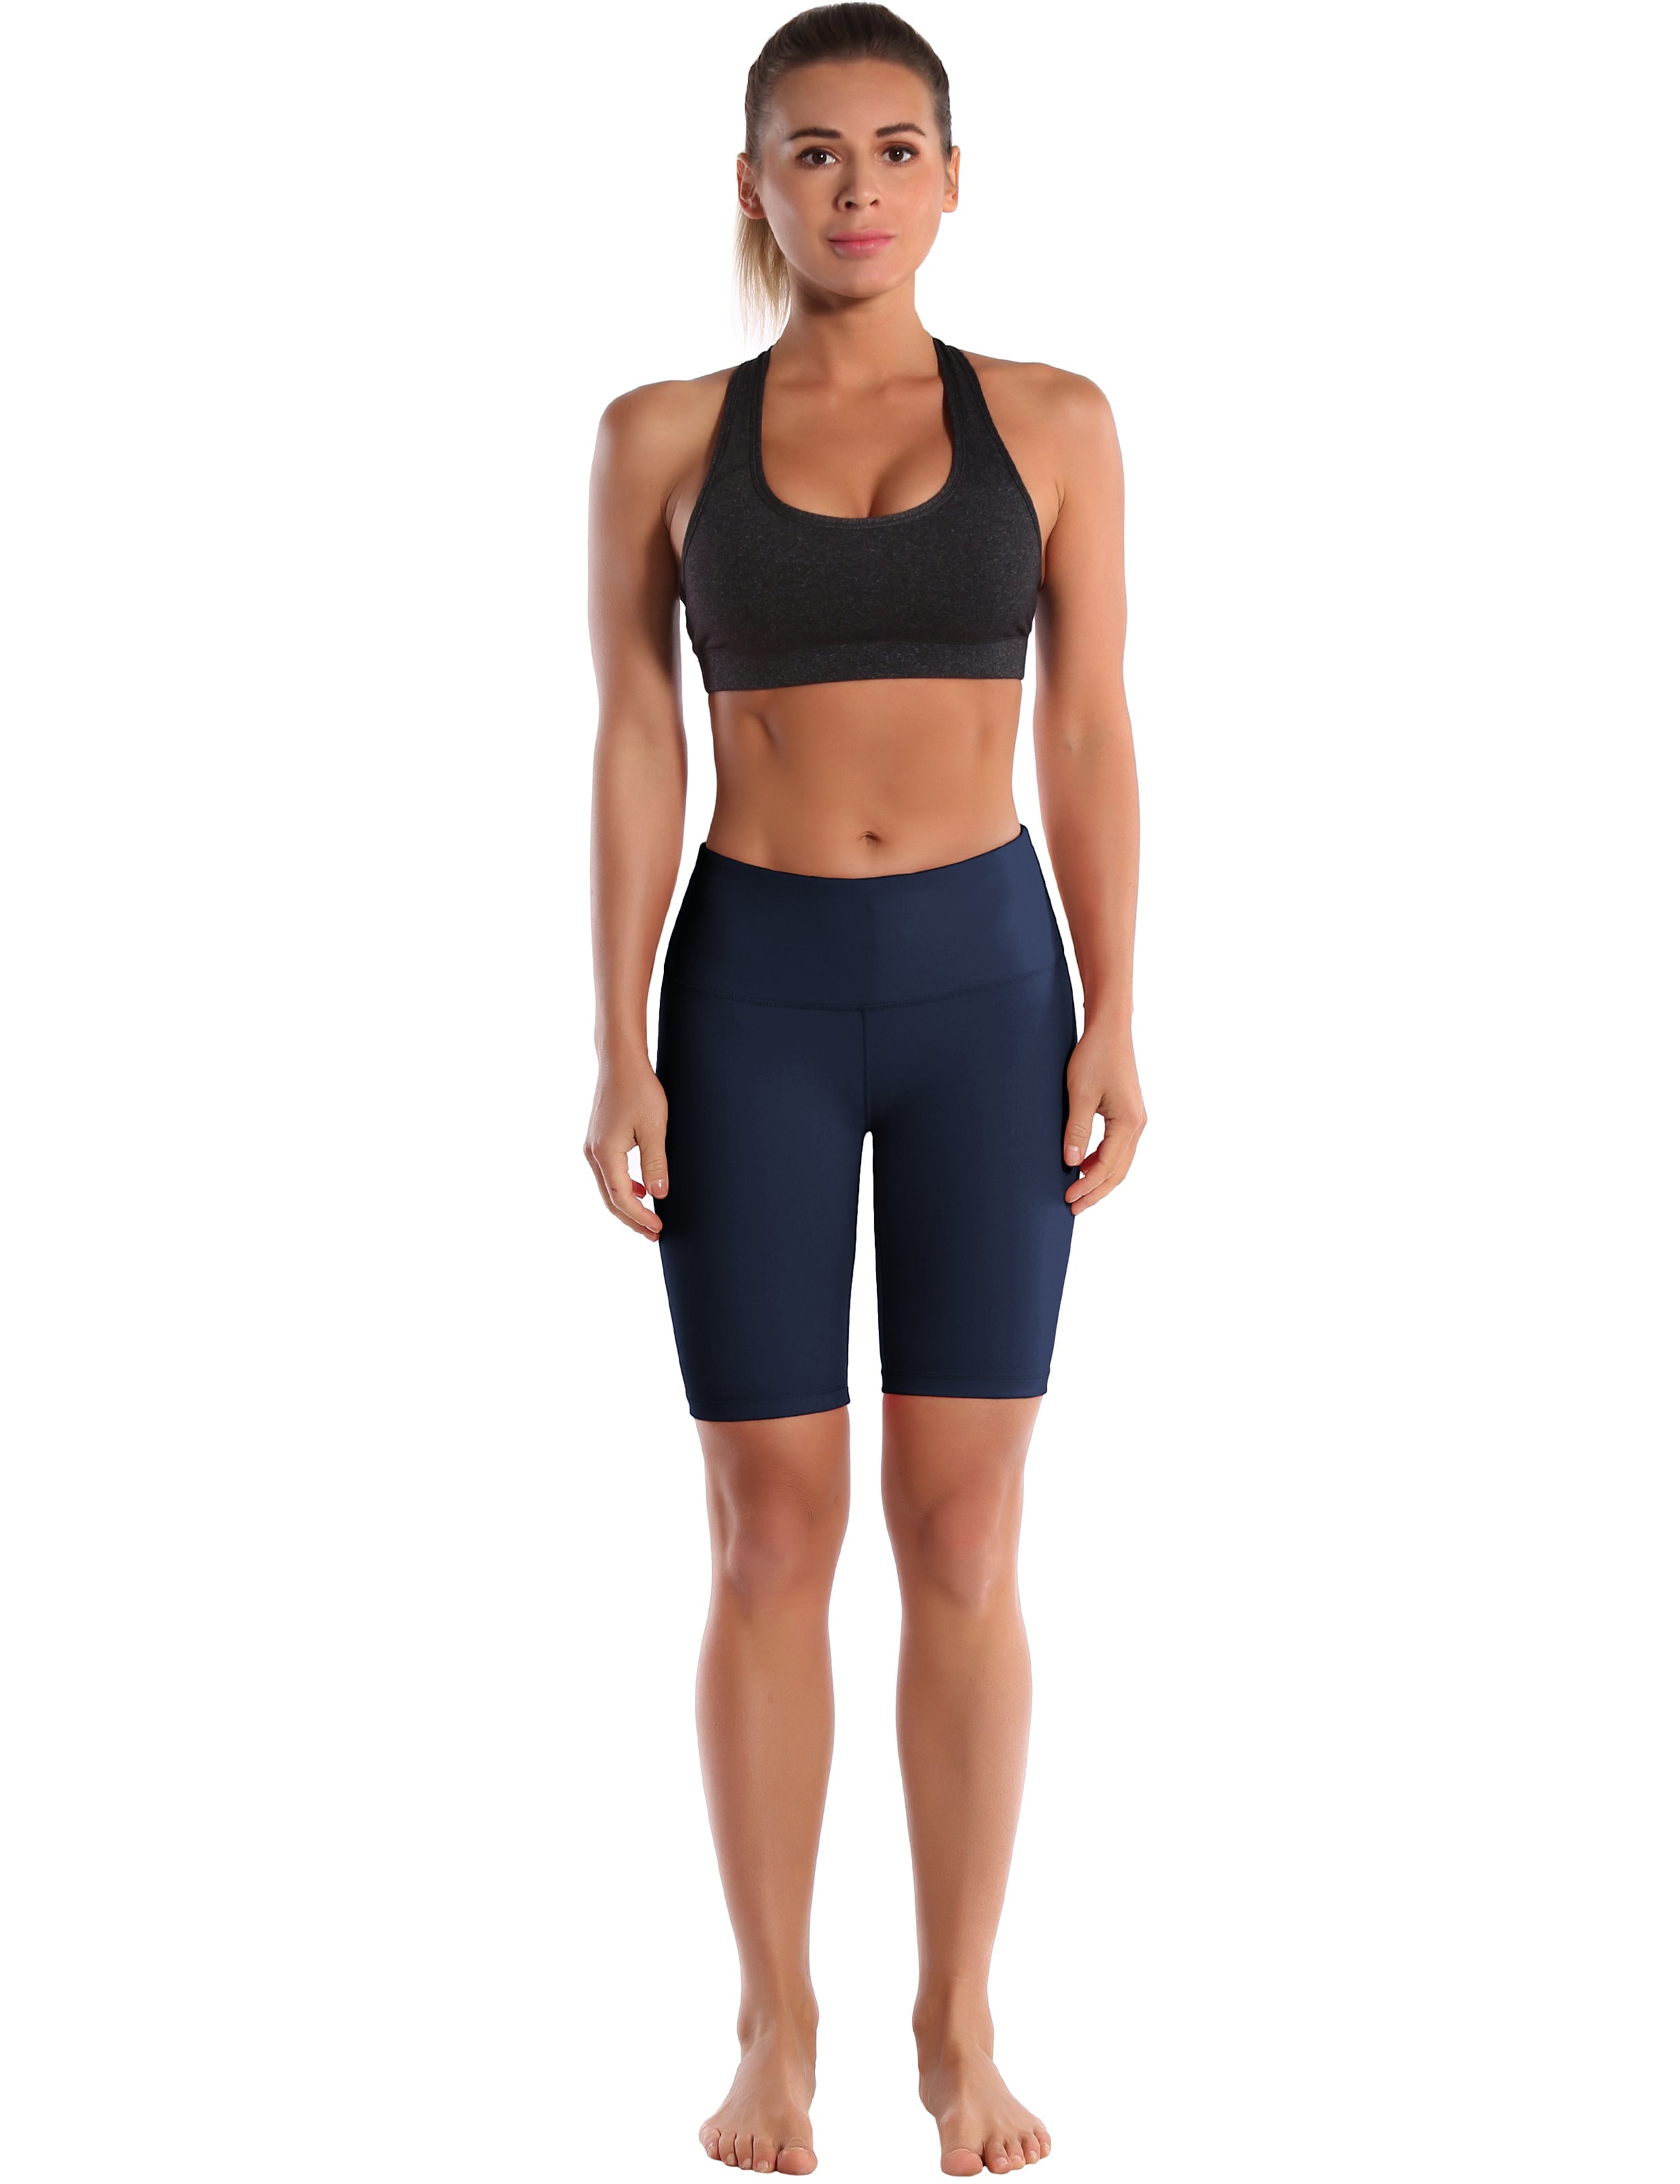 8" High Waist Pilates Shorts darknavy Sleek, soft, smooth and totally comfortable: our newest style is here. Softest-ever fabric High elasticity High density 4-way stretch Fabric doesn't attract lint easily No see-through Moisture-wicking Machine wash 75% Nylon, 25% Spandex